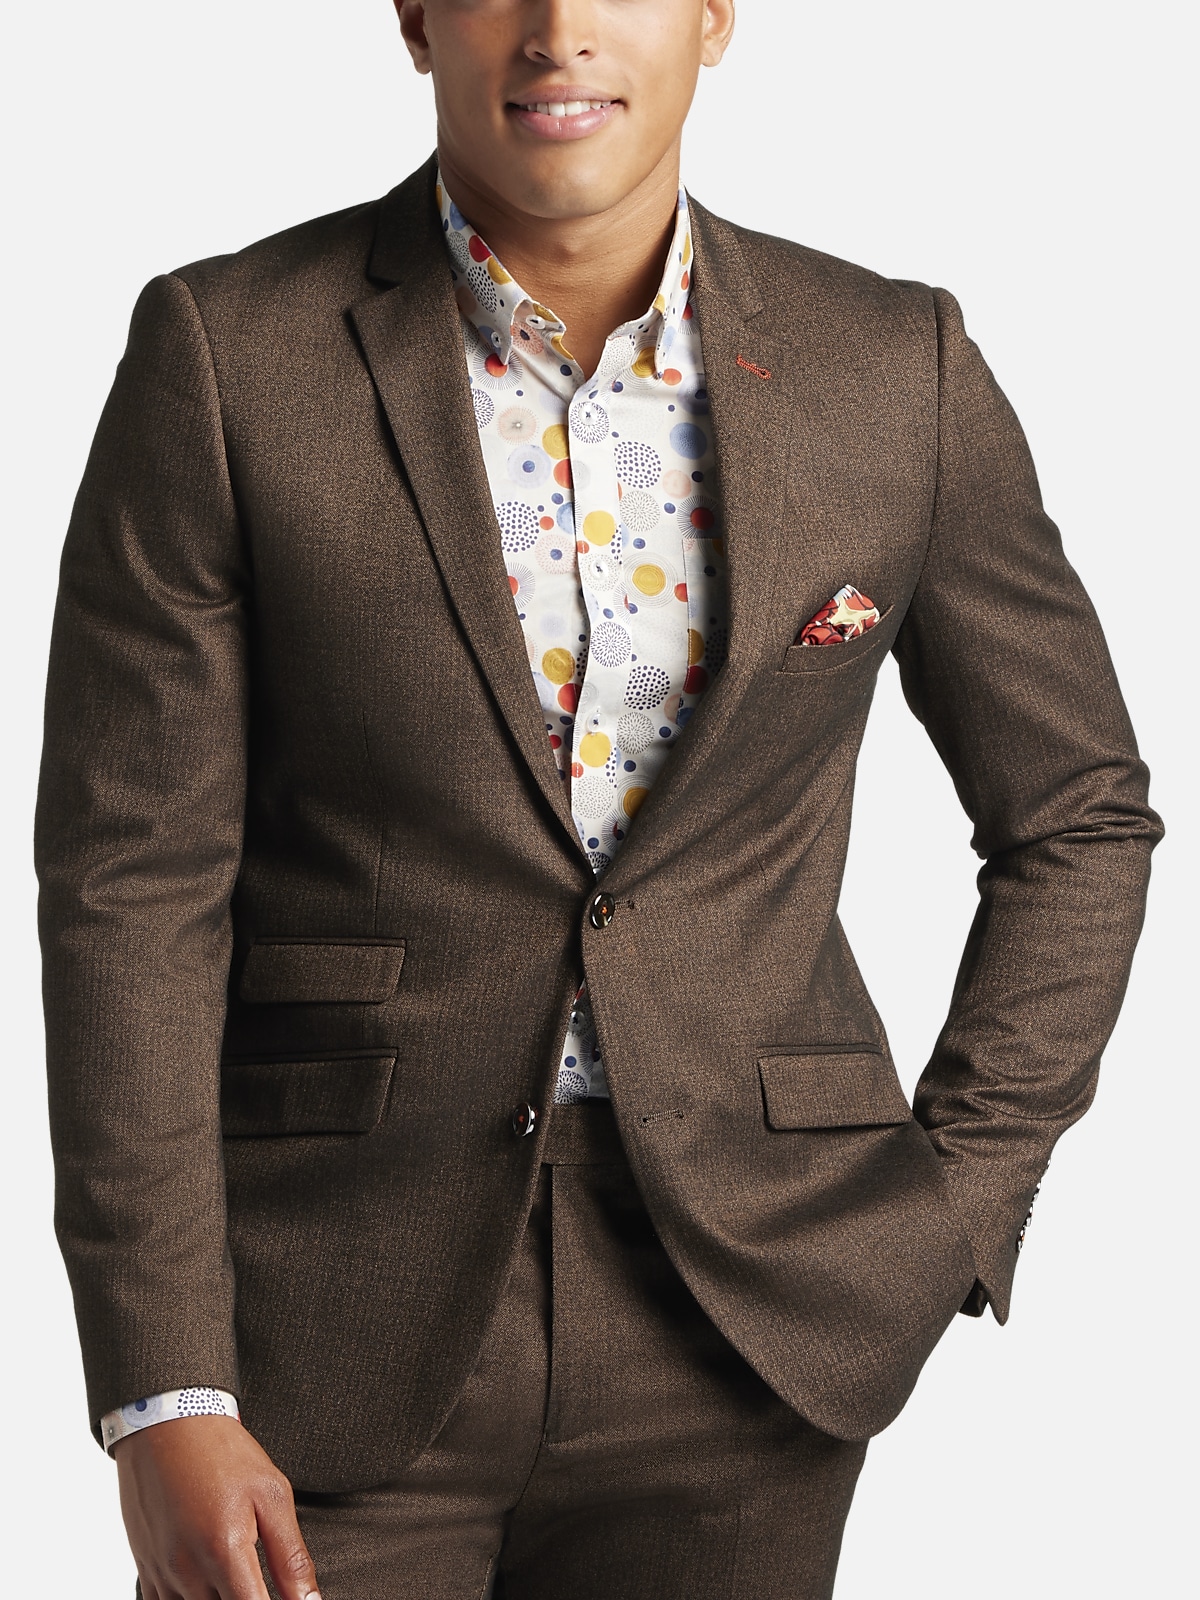 https://image.menswearhouse.com/is/image/TMW/TMW_3Y6T_53_PAISLEY_GRAY_SUIT_SEPARATE_JACKETS_COCO_HERRINGBONE_MAIN?imPolicy=pdp-zoom-mob